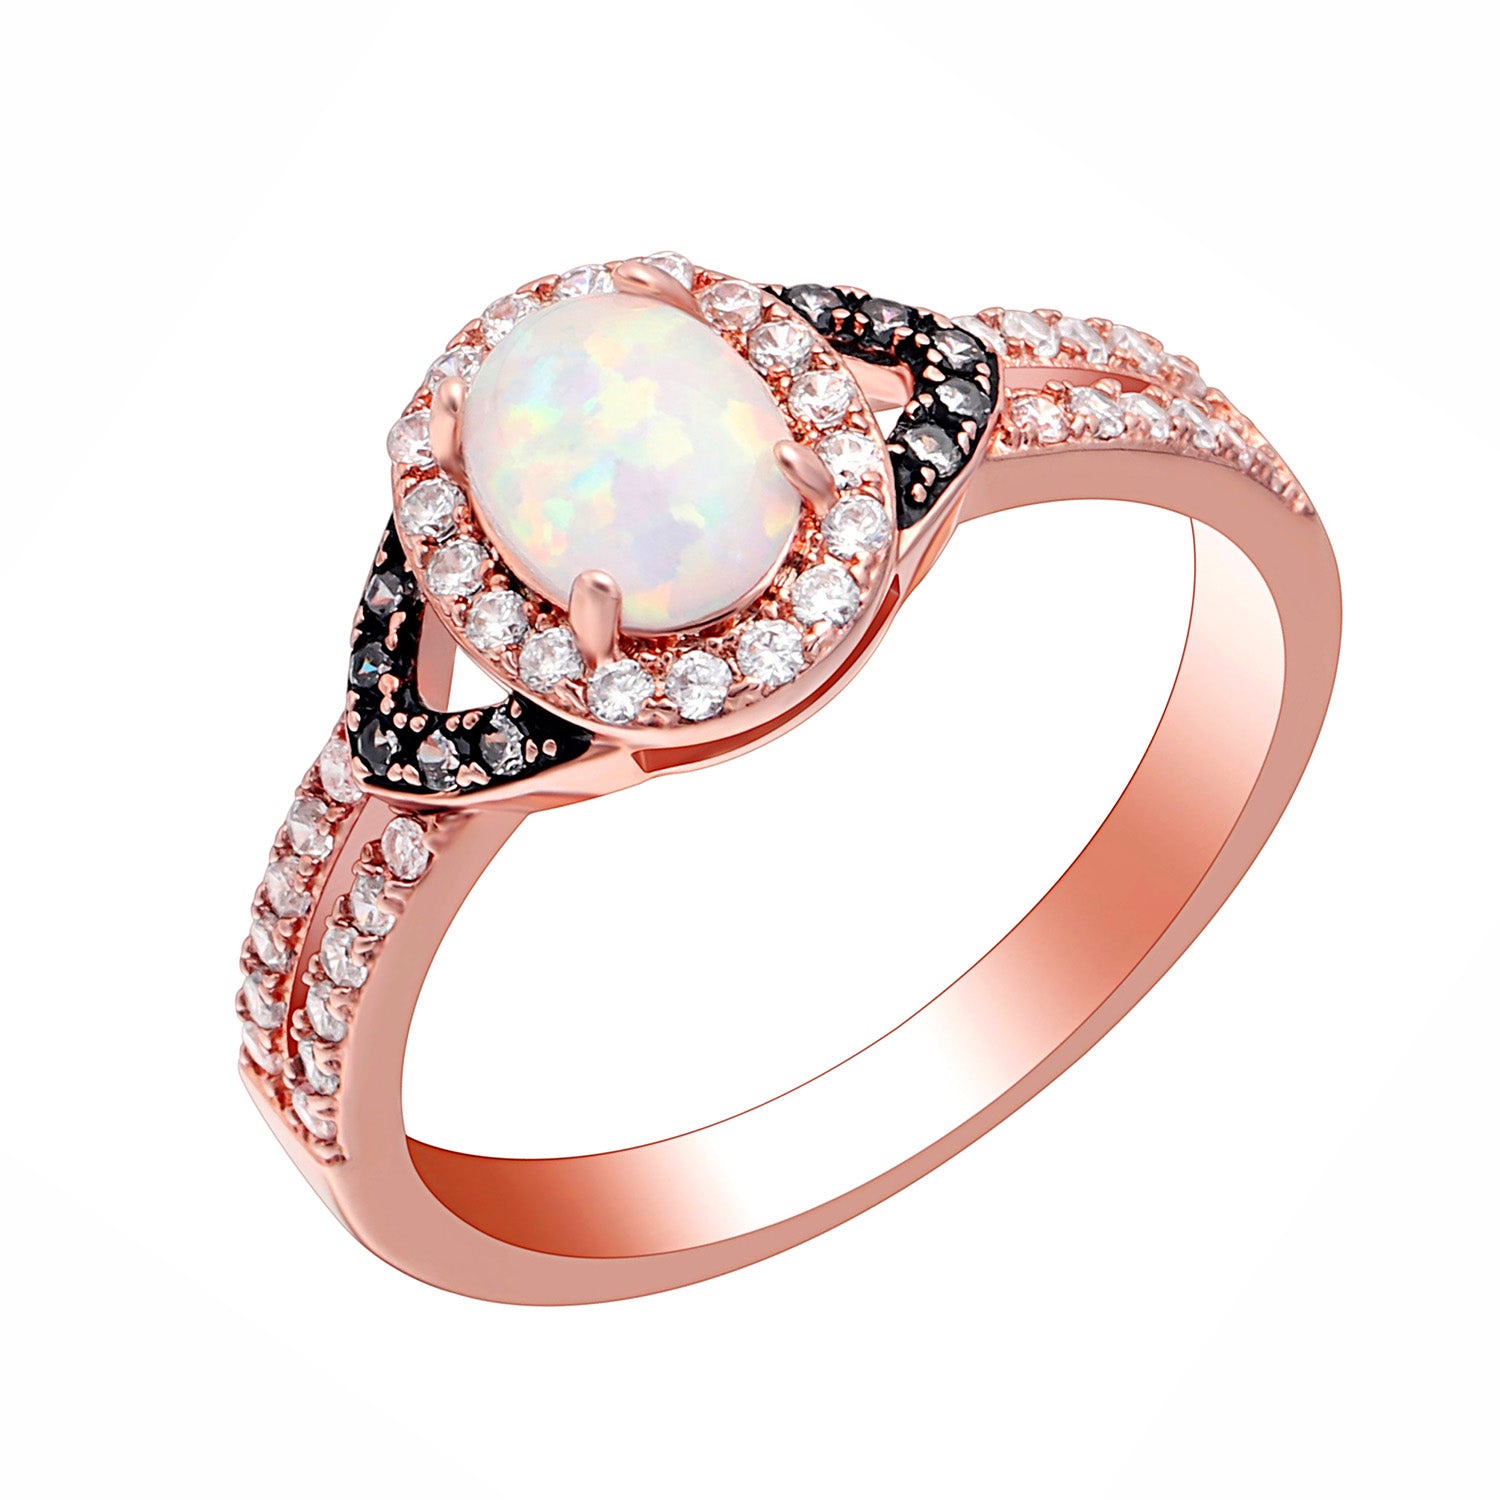 Chocolate Rose Gold Plated White Fire Opal Engagement Ring Women Ginger Lyne - 8